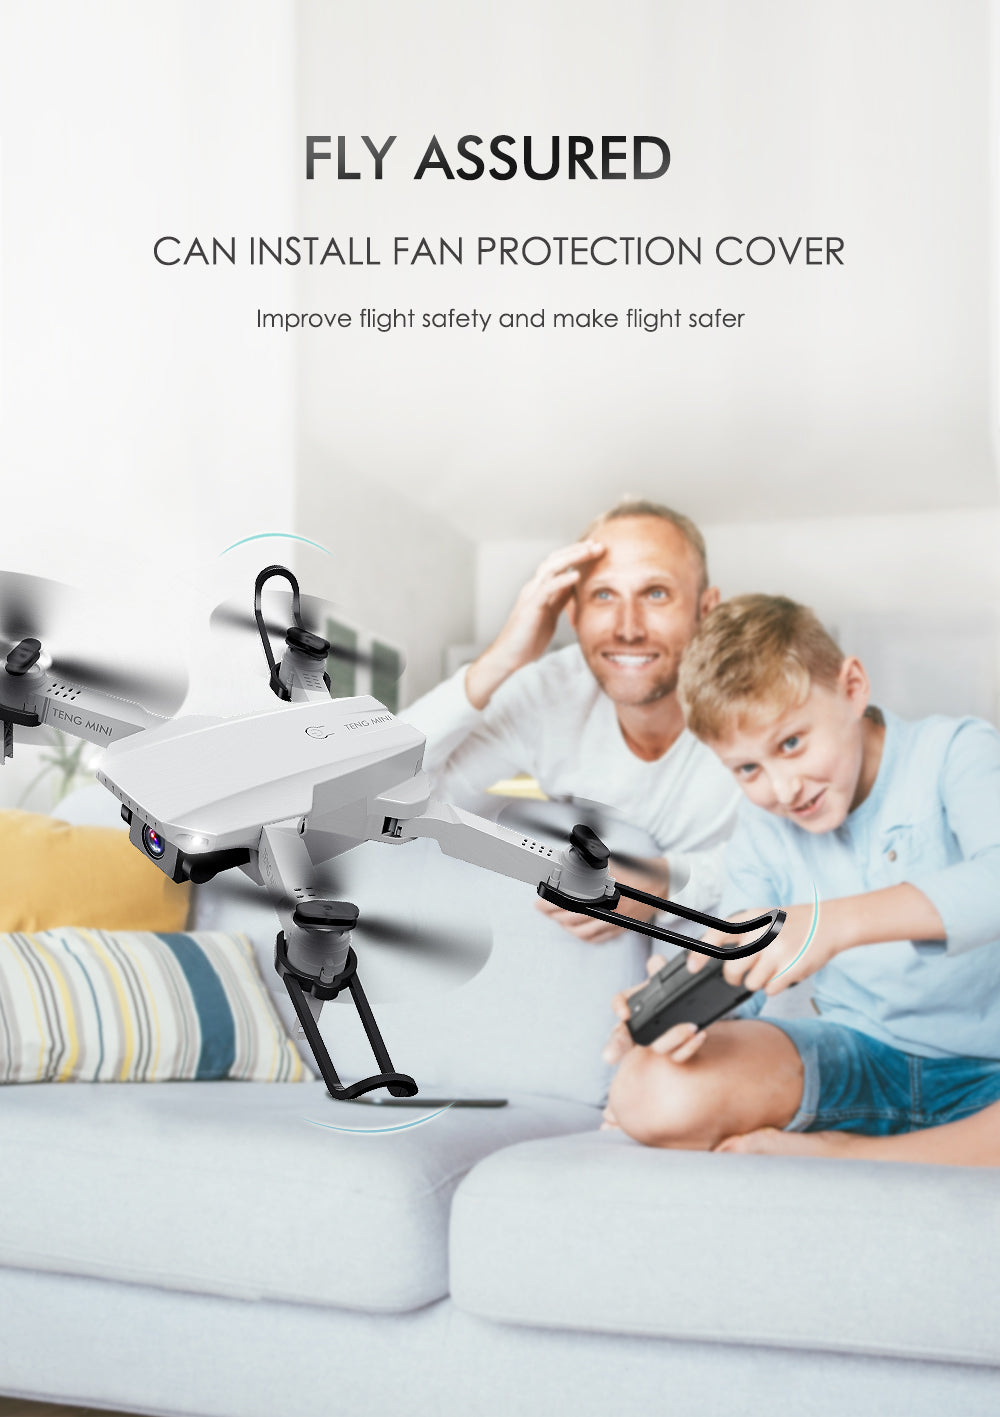 FLY ASSURED£¬CAN INSTALL FAN PROTECTION COVER Improve flightsafety and make flight safer